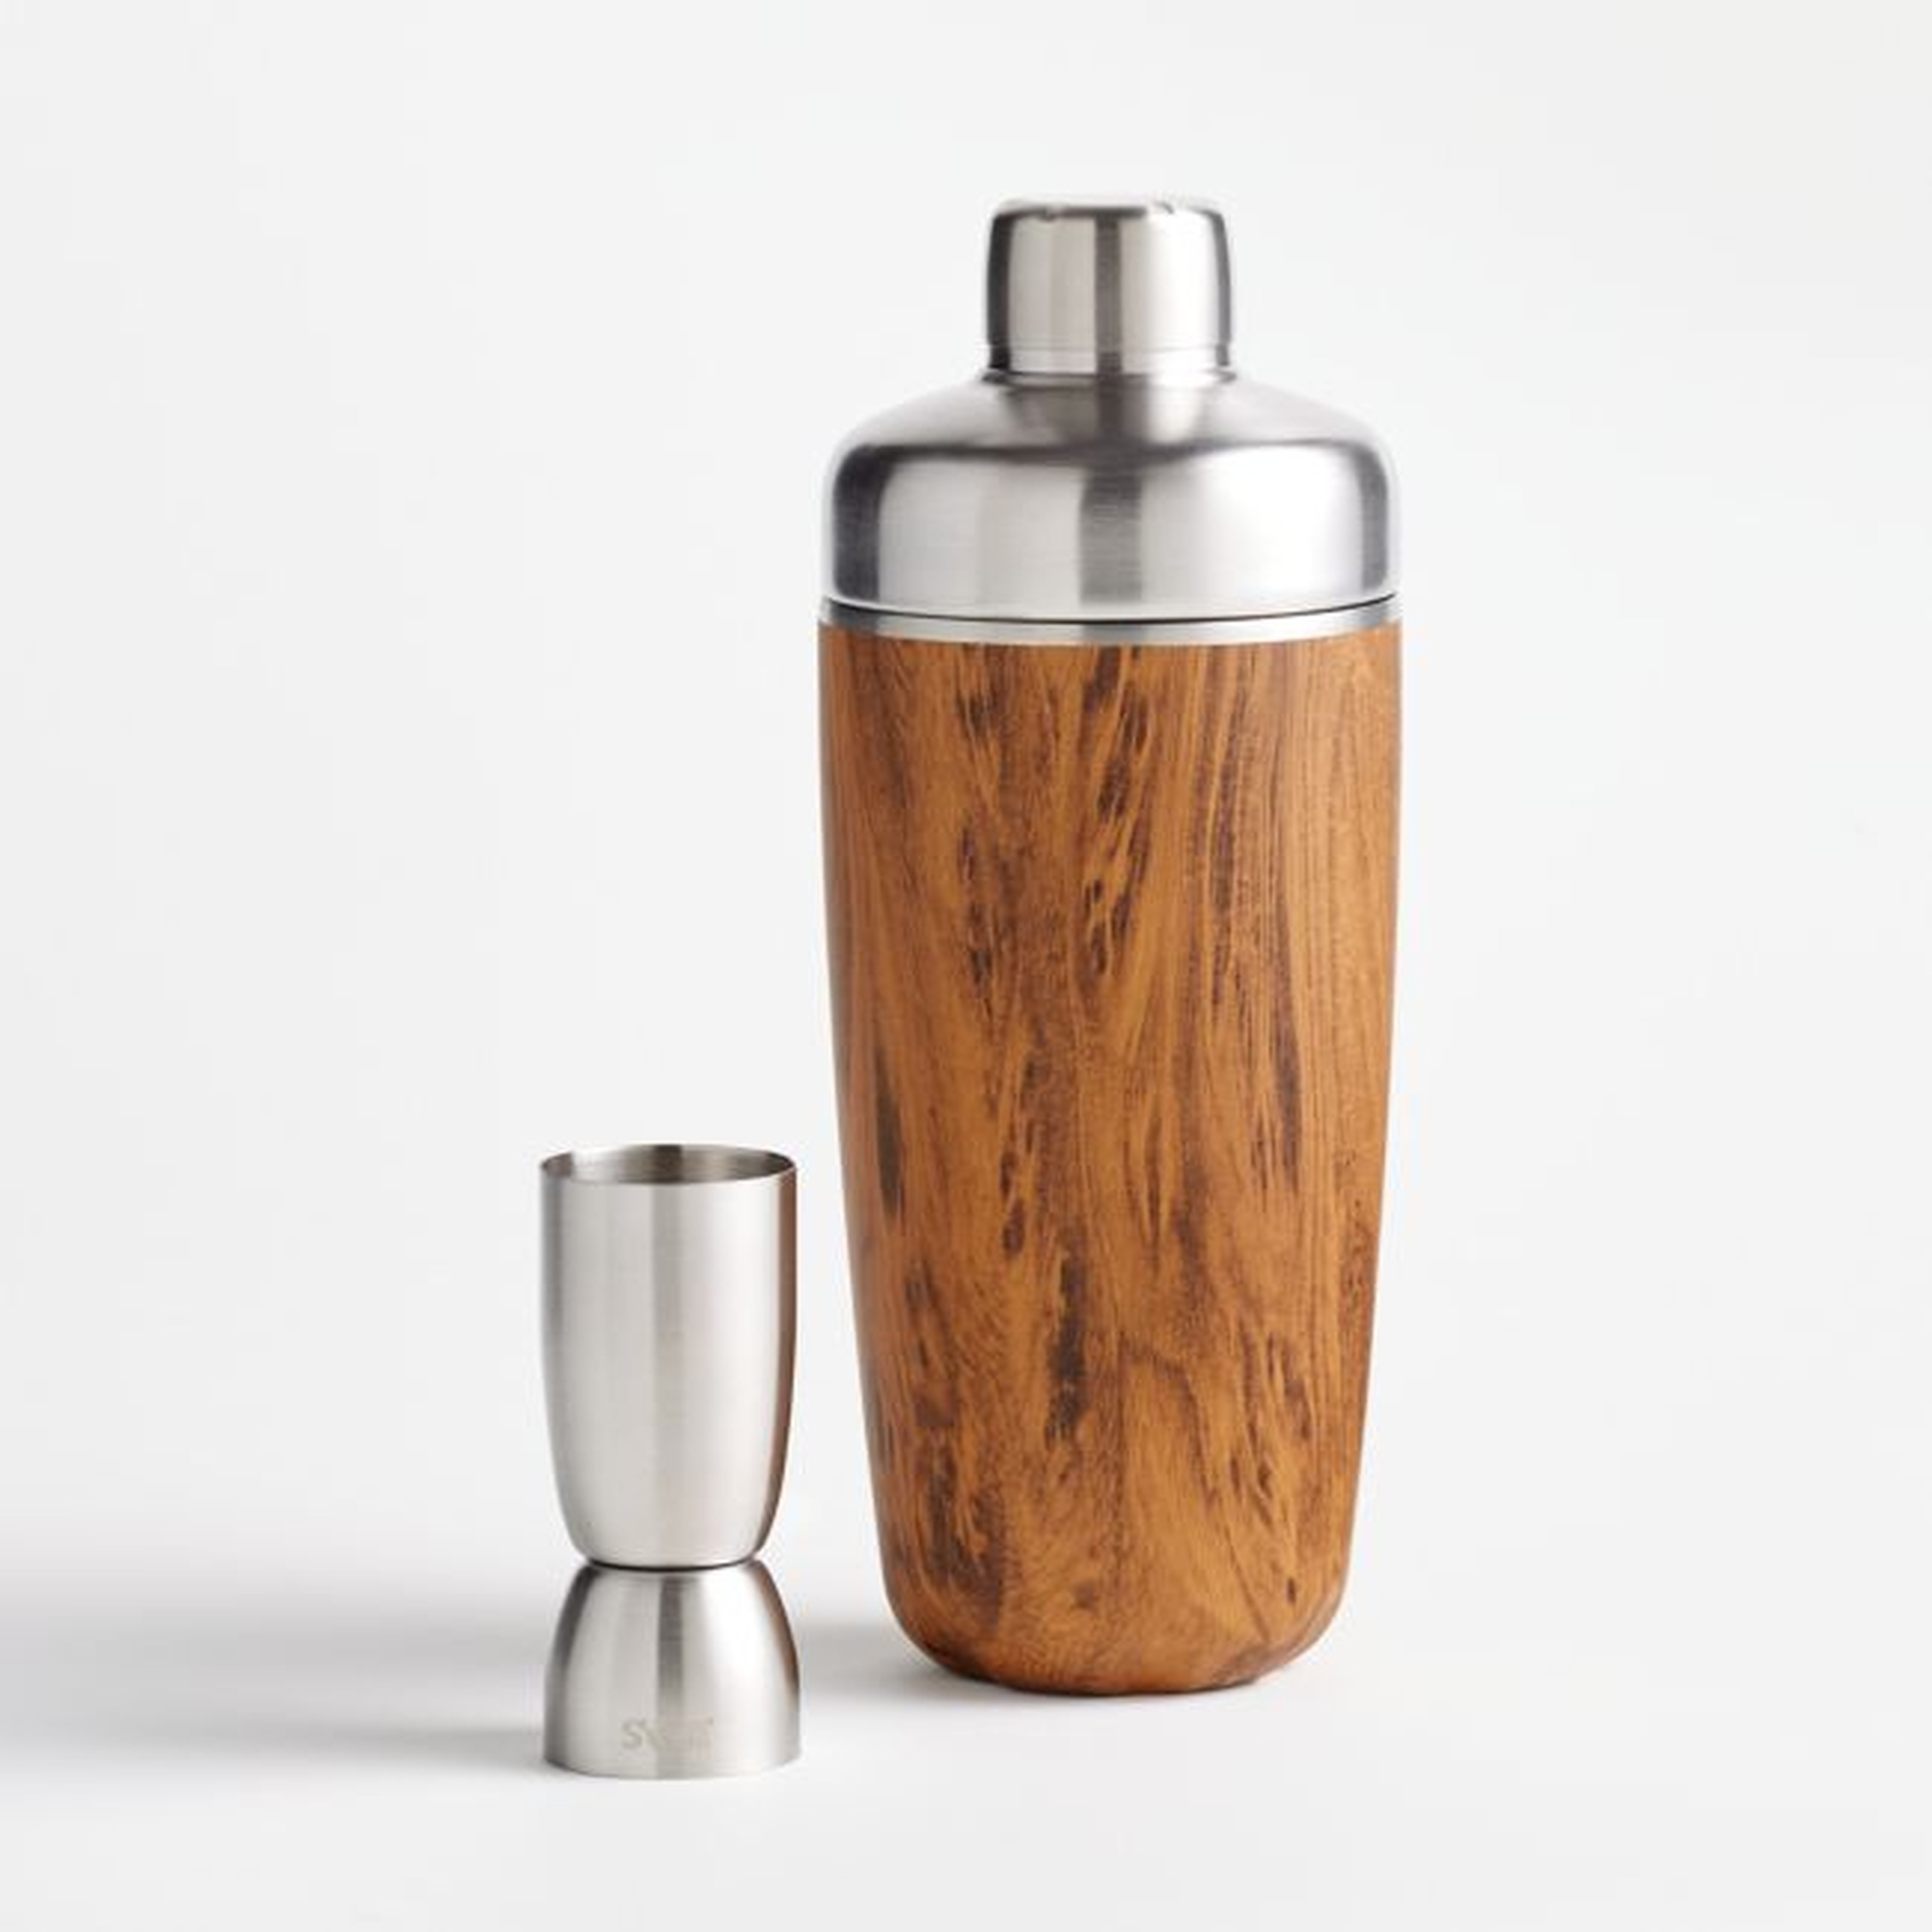 S'well Teakwood Cocktail Shaker Set - Crate and Barrel